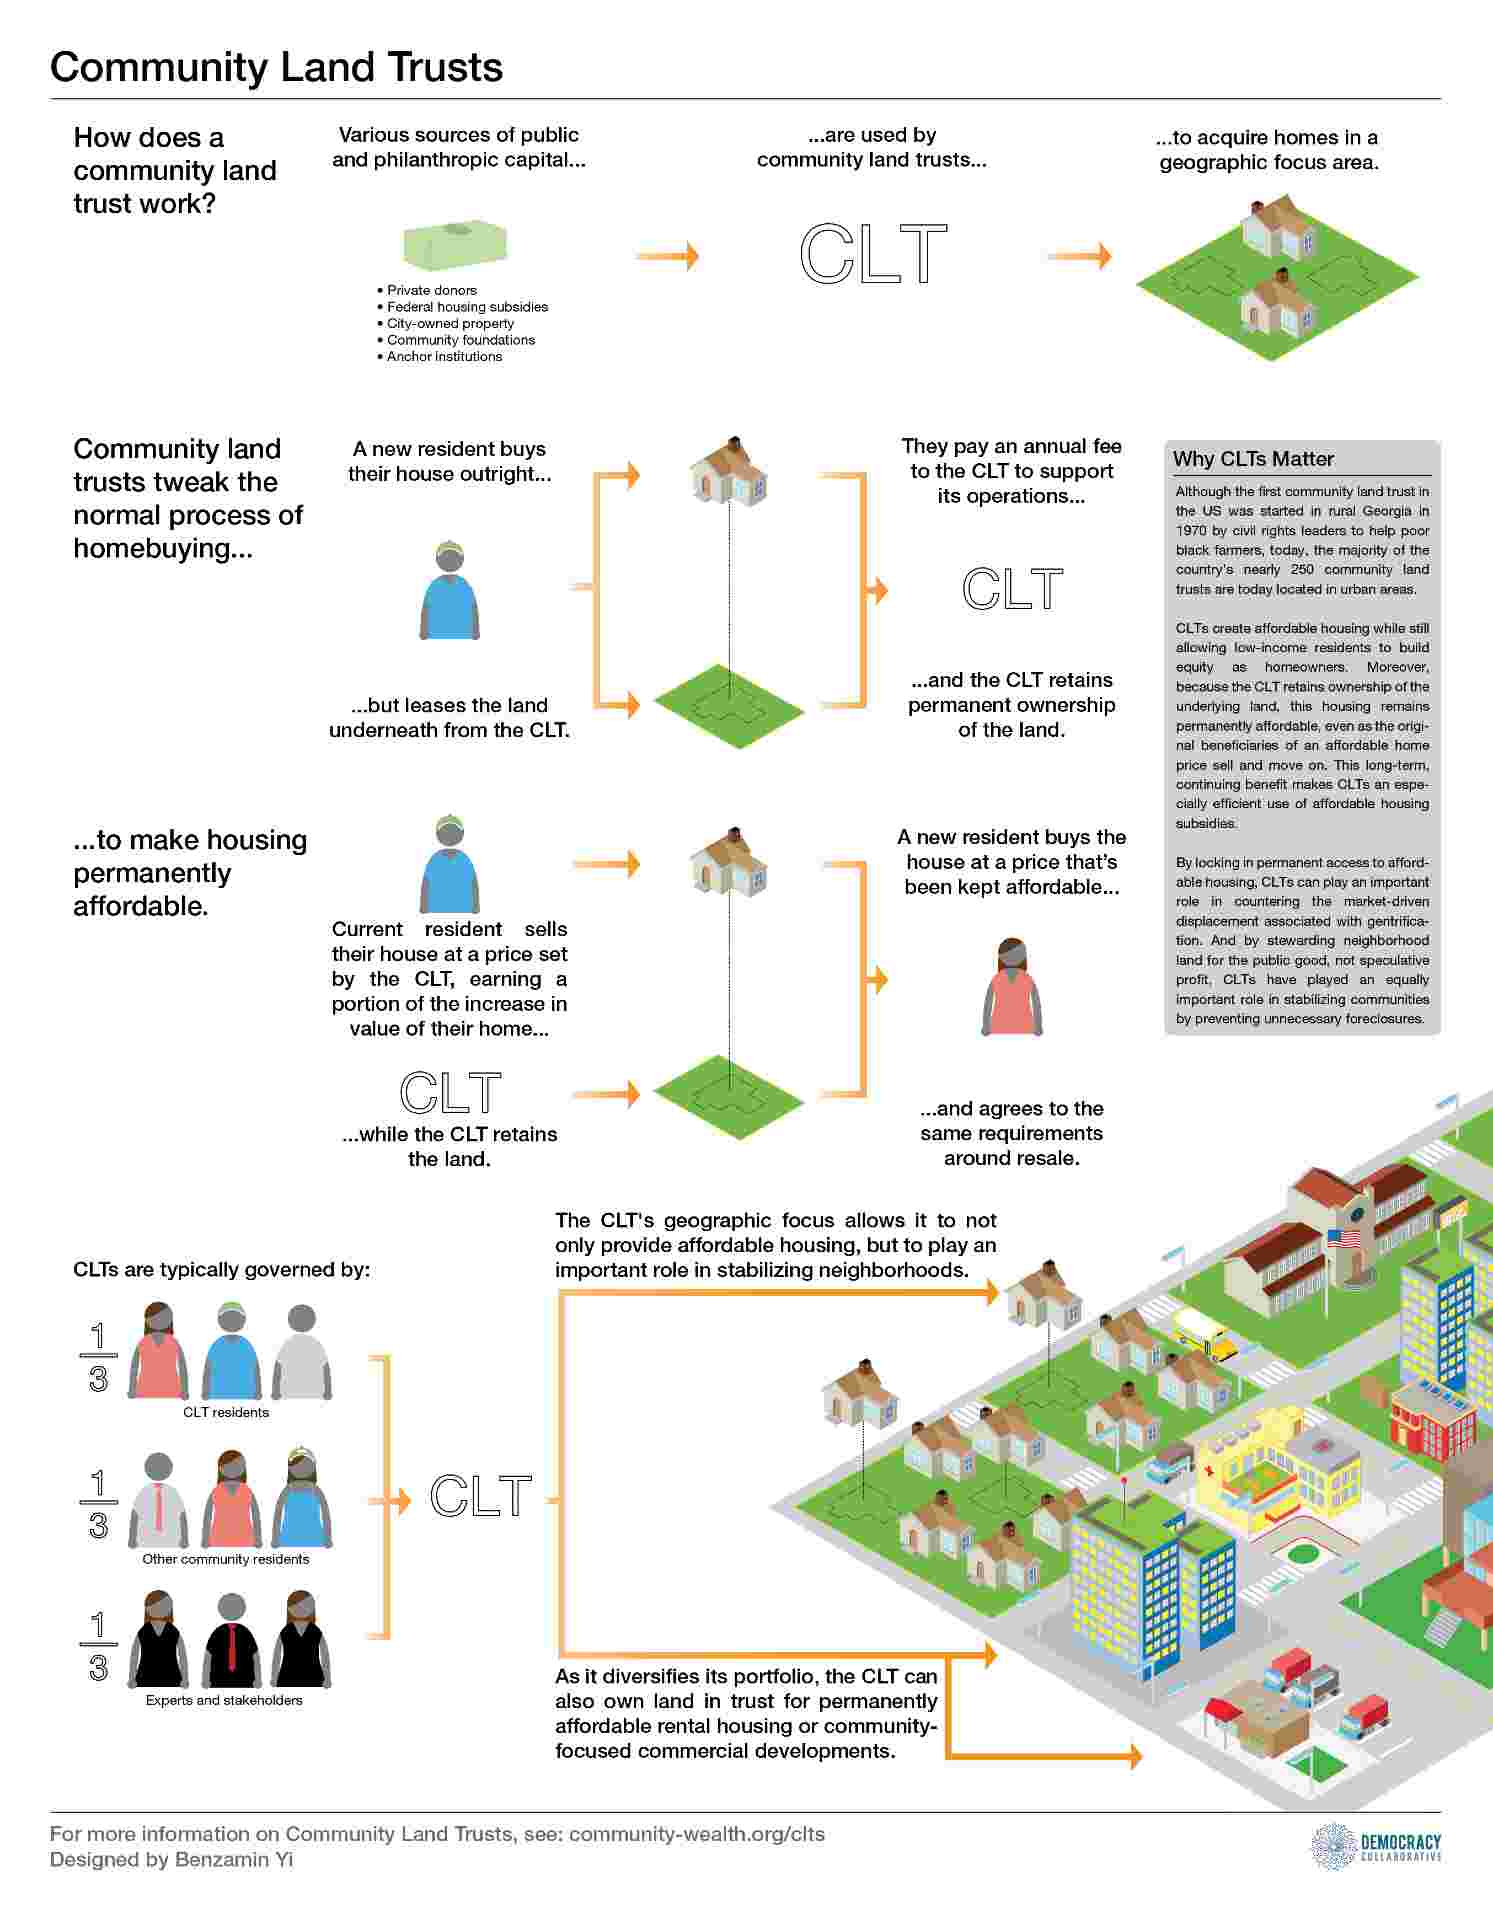 Infographic describing how a community land trust operates.